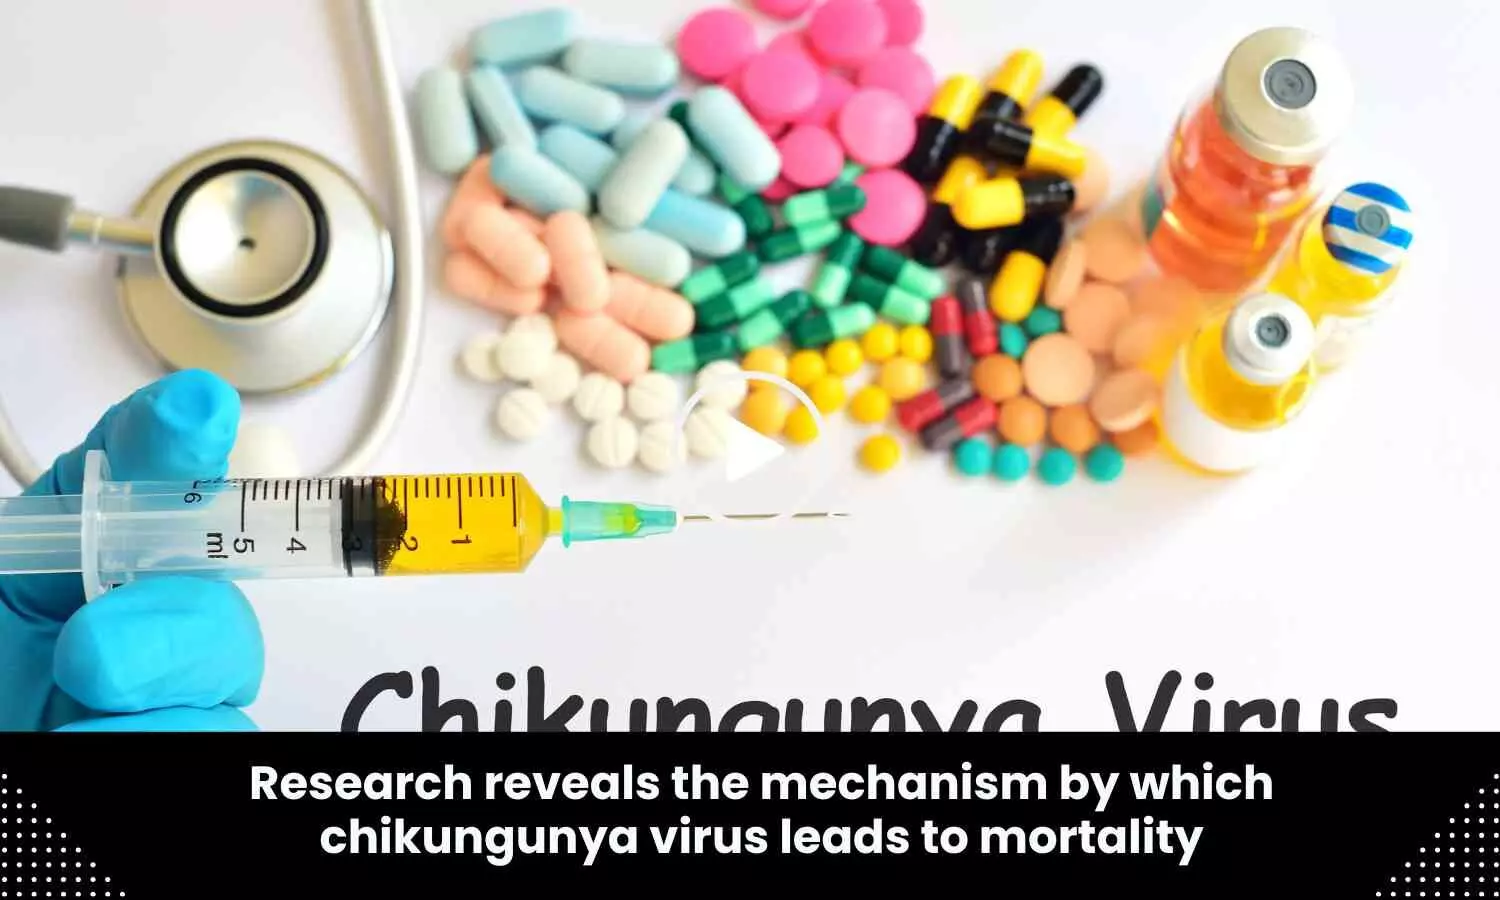 Research reveals the mechanism by which chikungunya virus leads to mortality